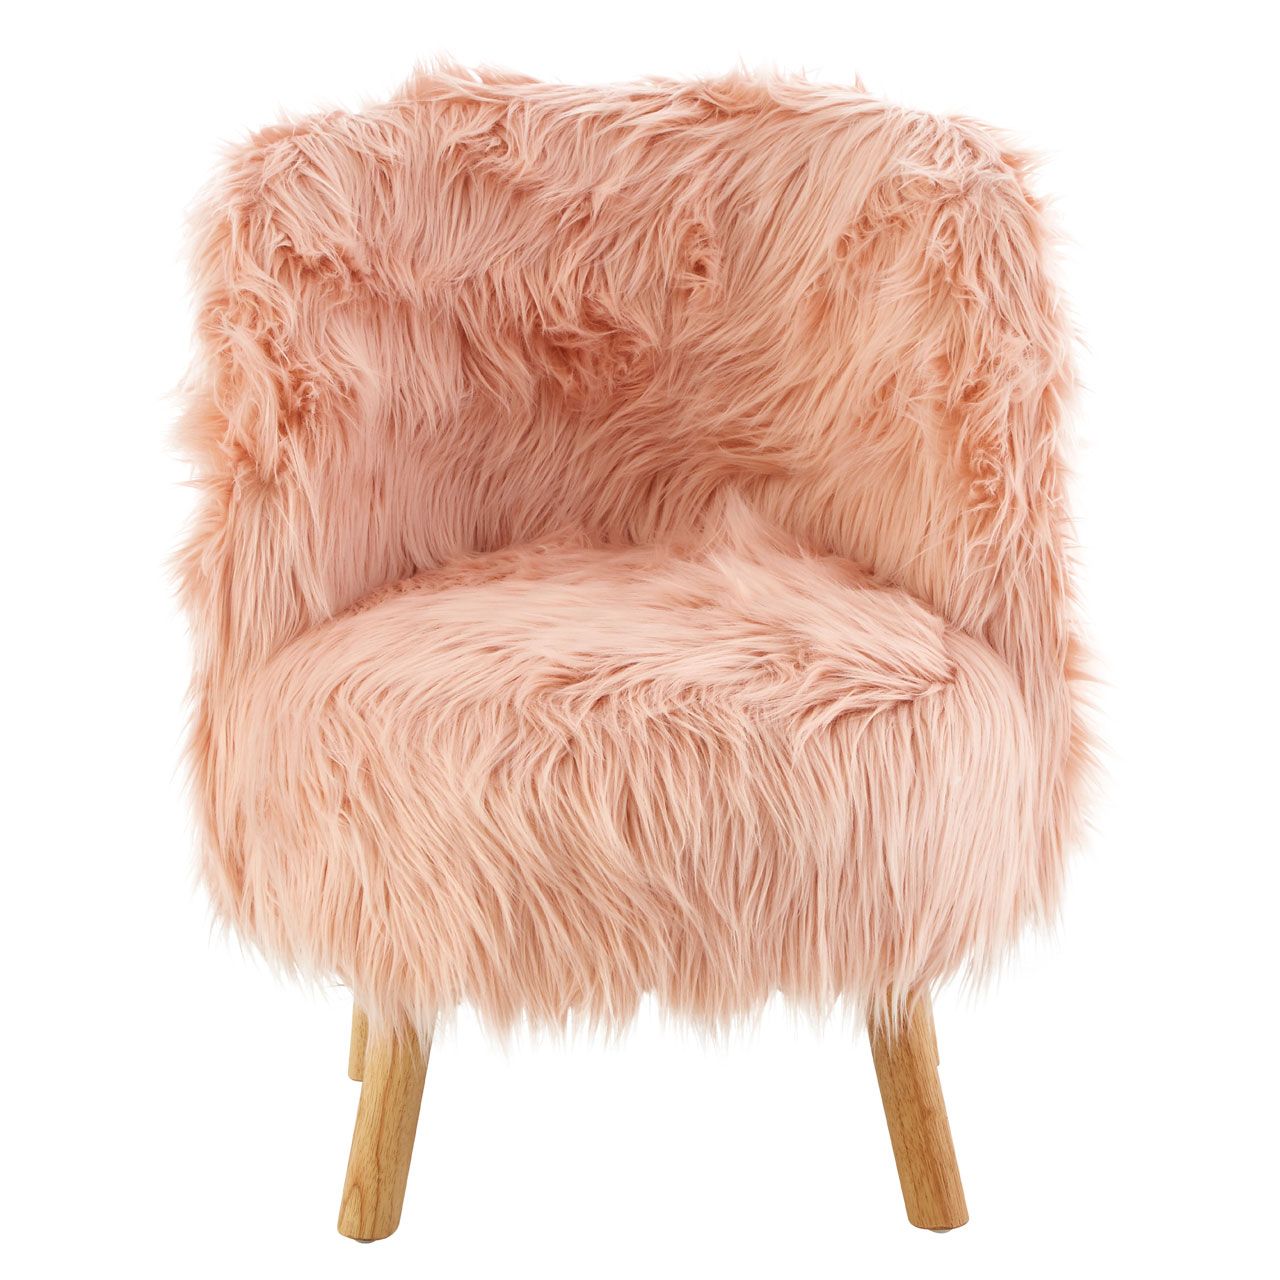 Lack Faux Fur Round Accent Stools With Storage With 2019 Kids Pink Chair Faux Fur Living Room Home Furniture Fluffy Accent (View 6 of 10)